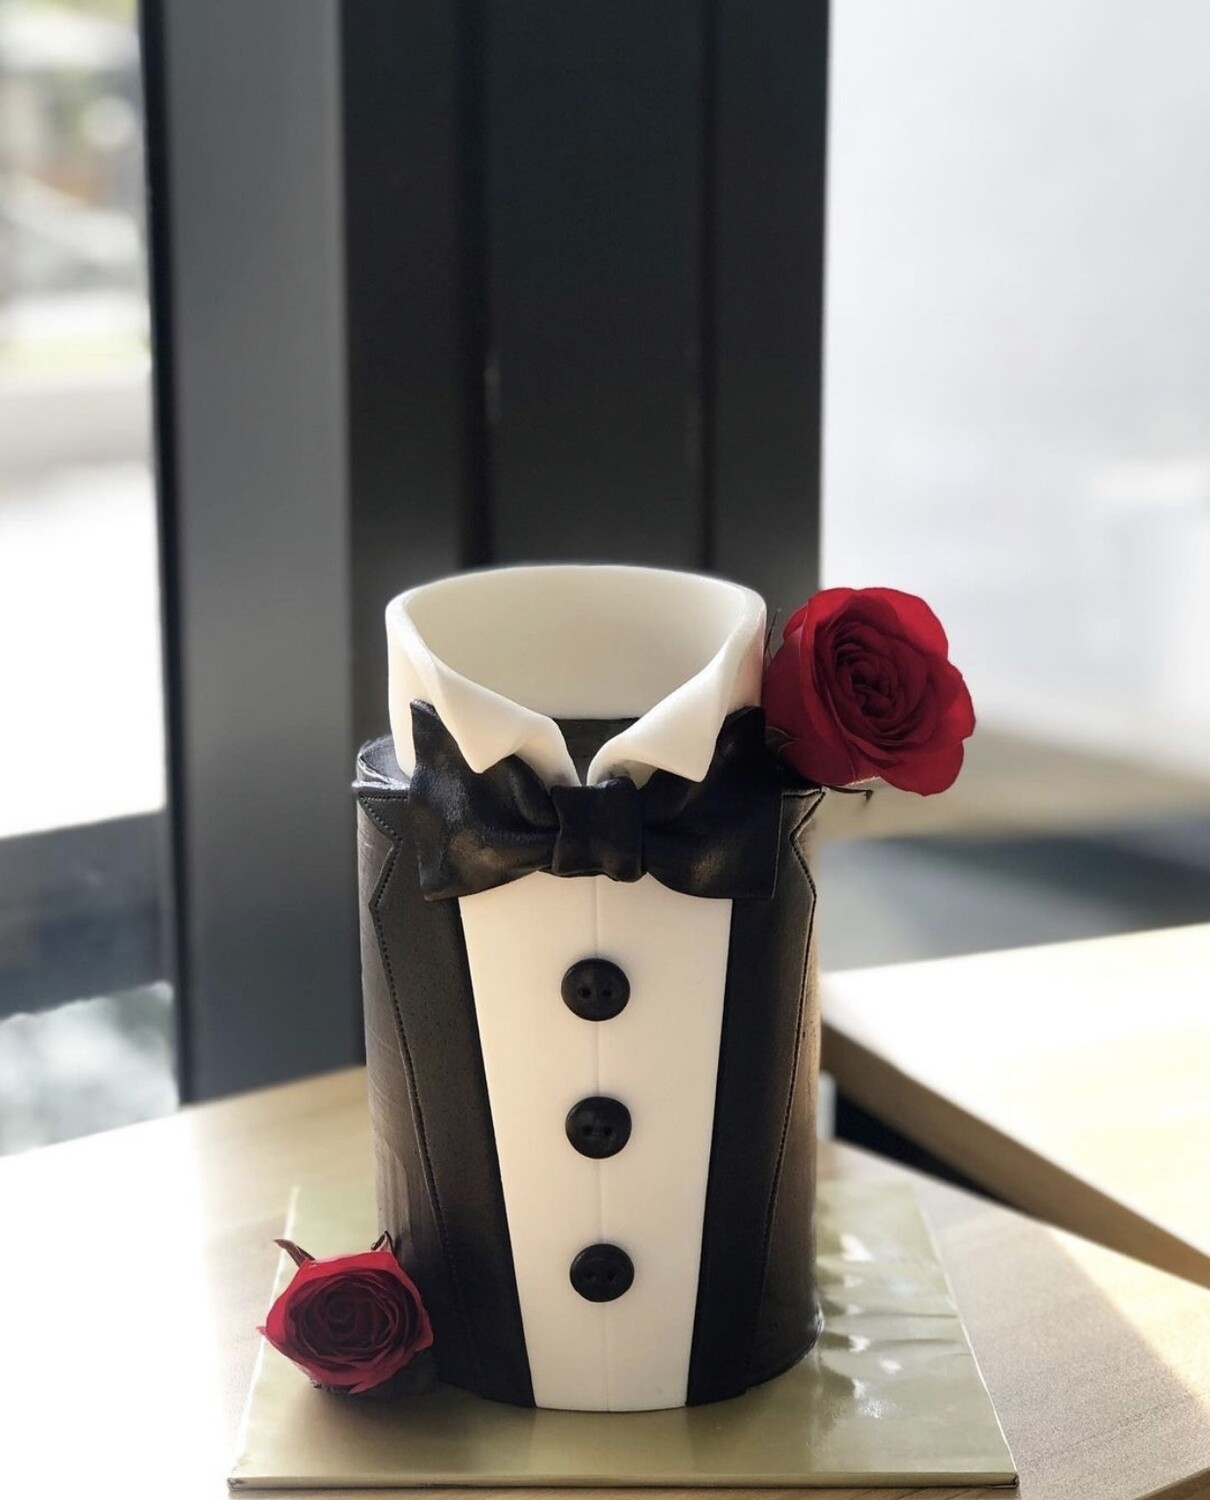 Fathers’ Day - Tuxedo Red Rose Cake